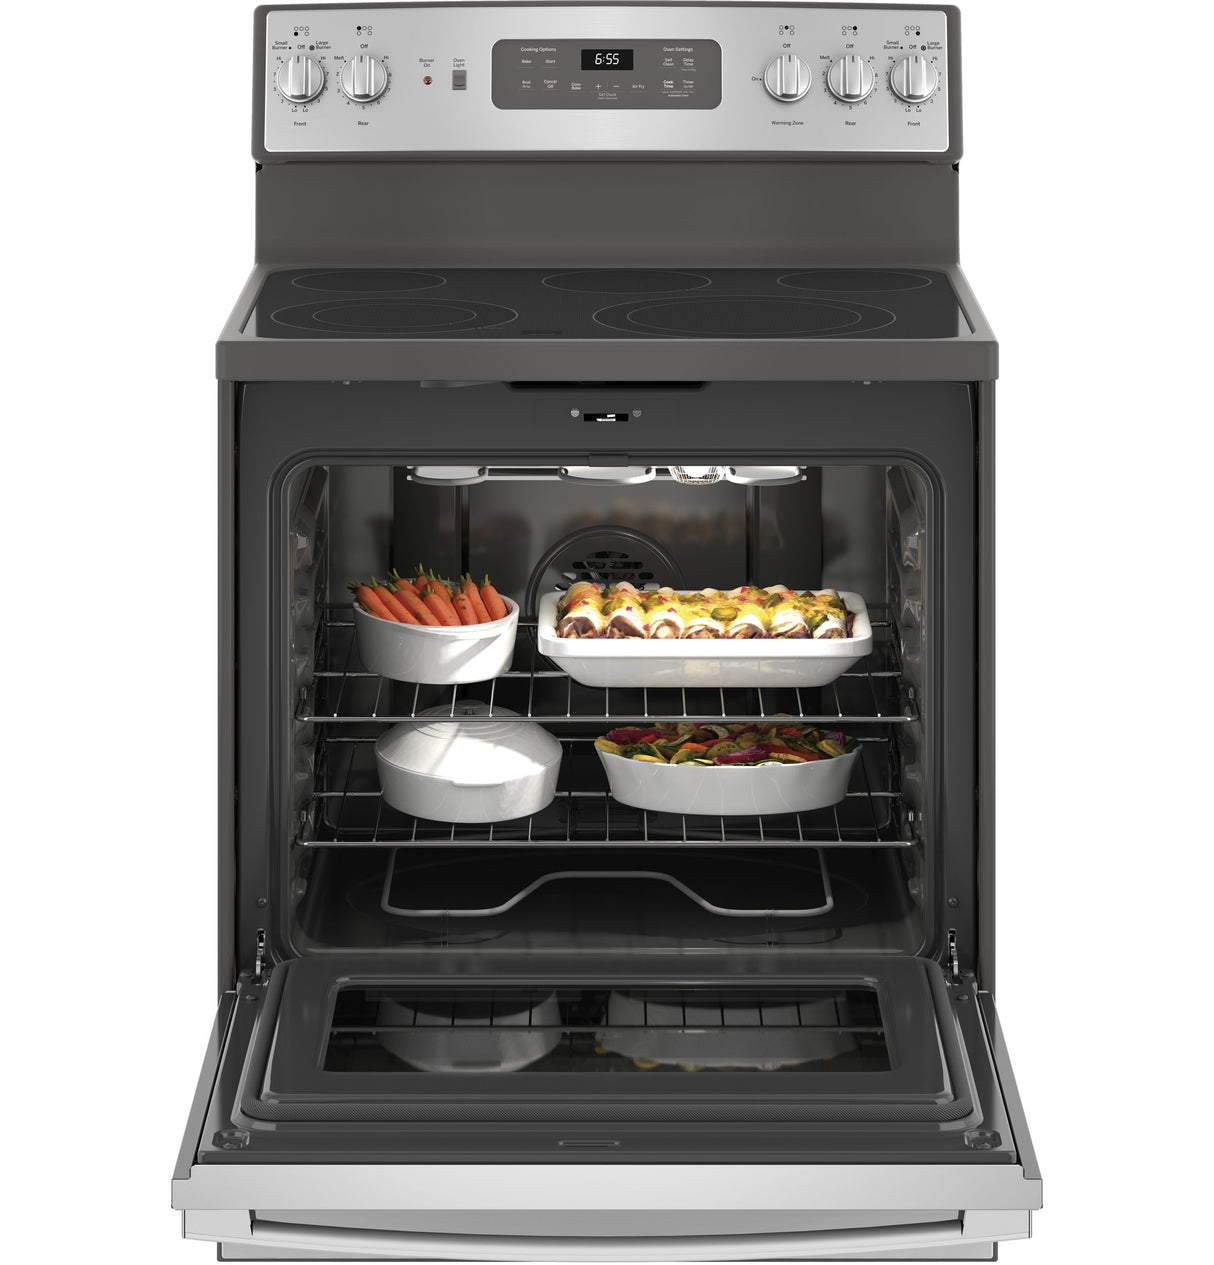 GE(R) 30" Free-Standing Electric Convection Range - (JB655SKSS)